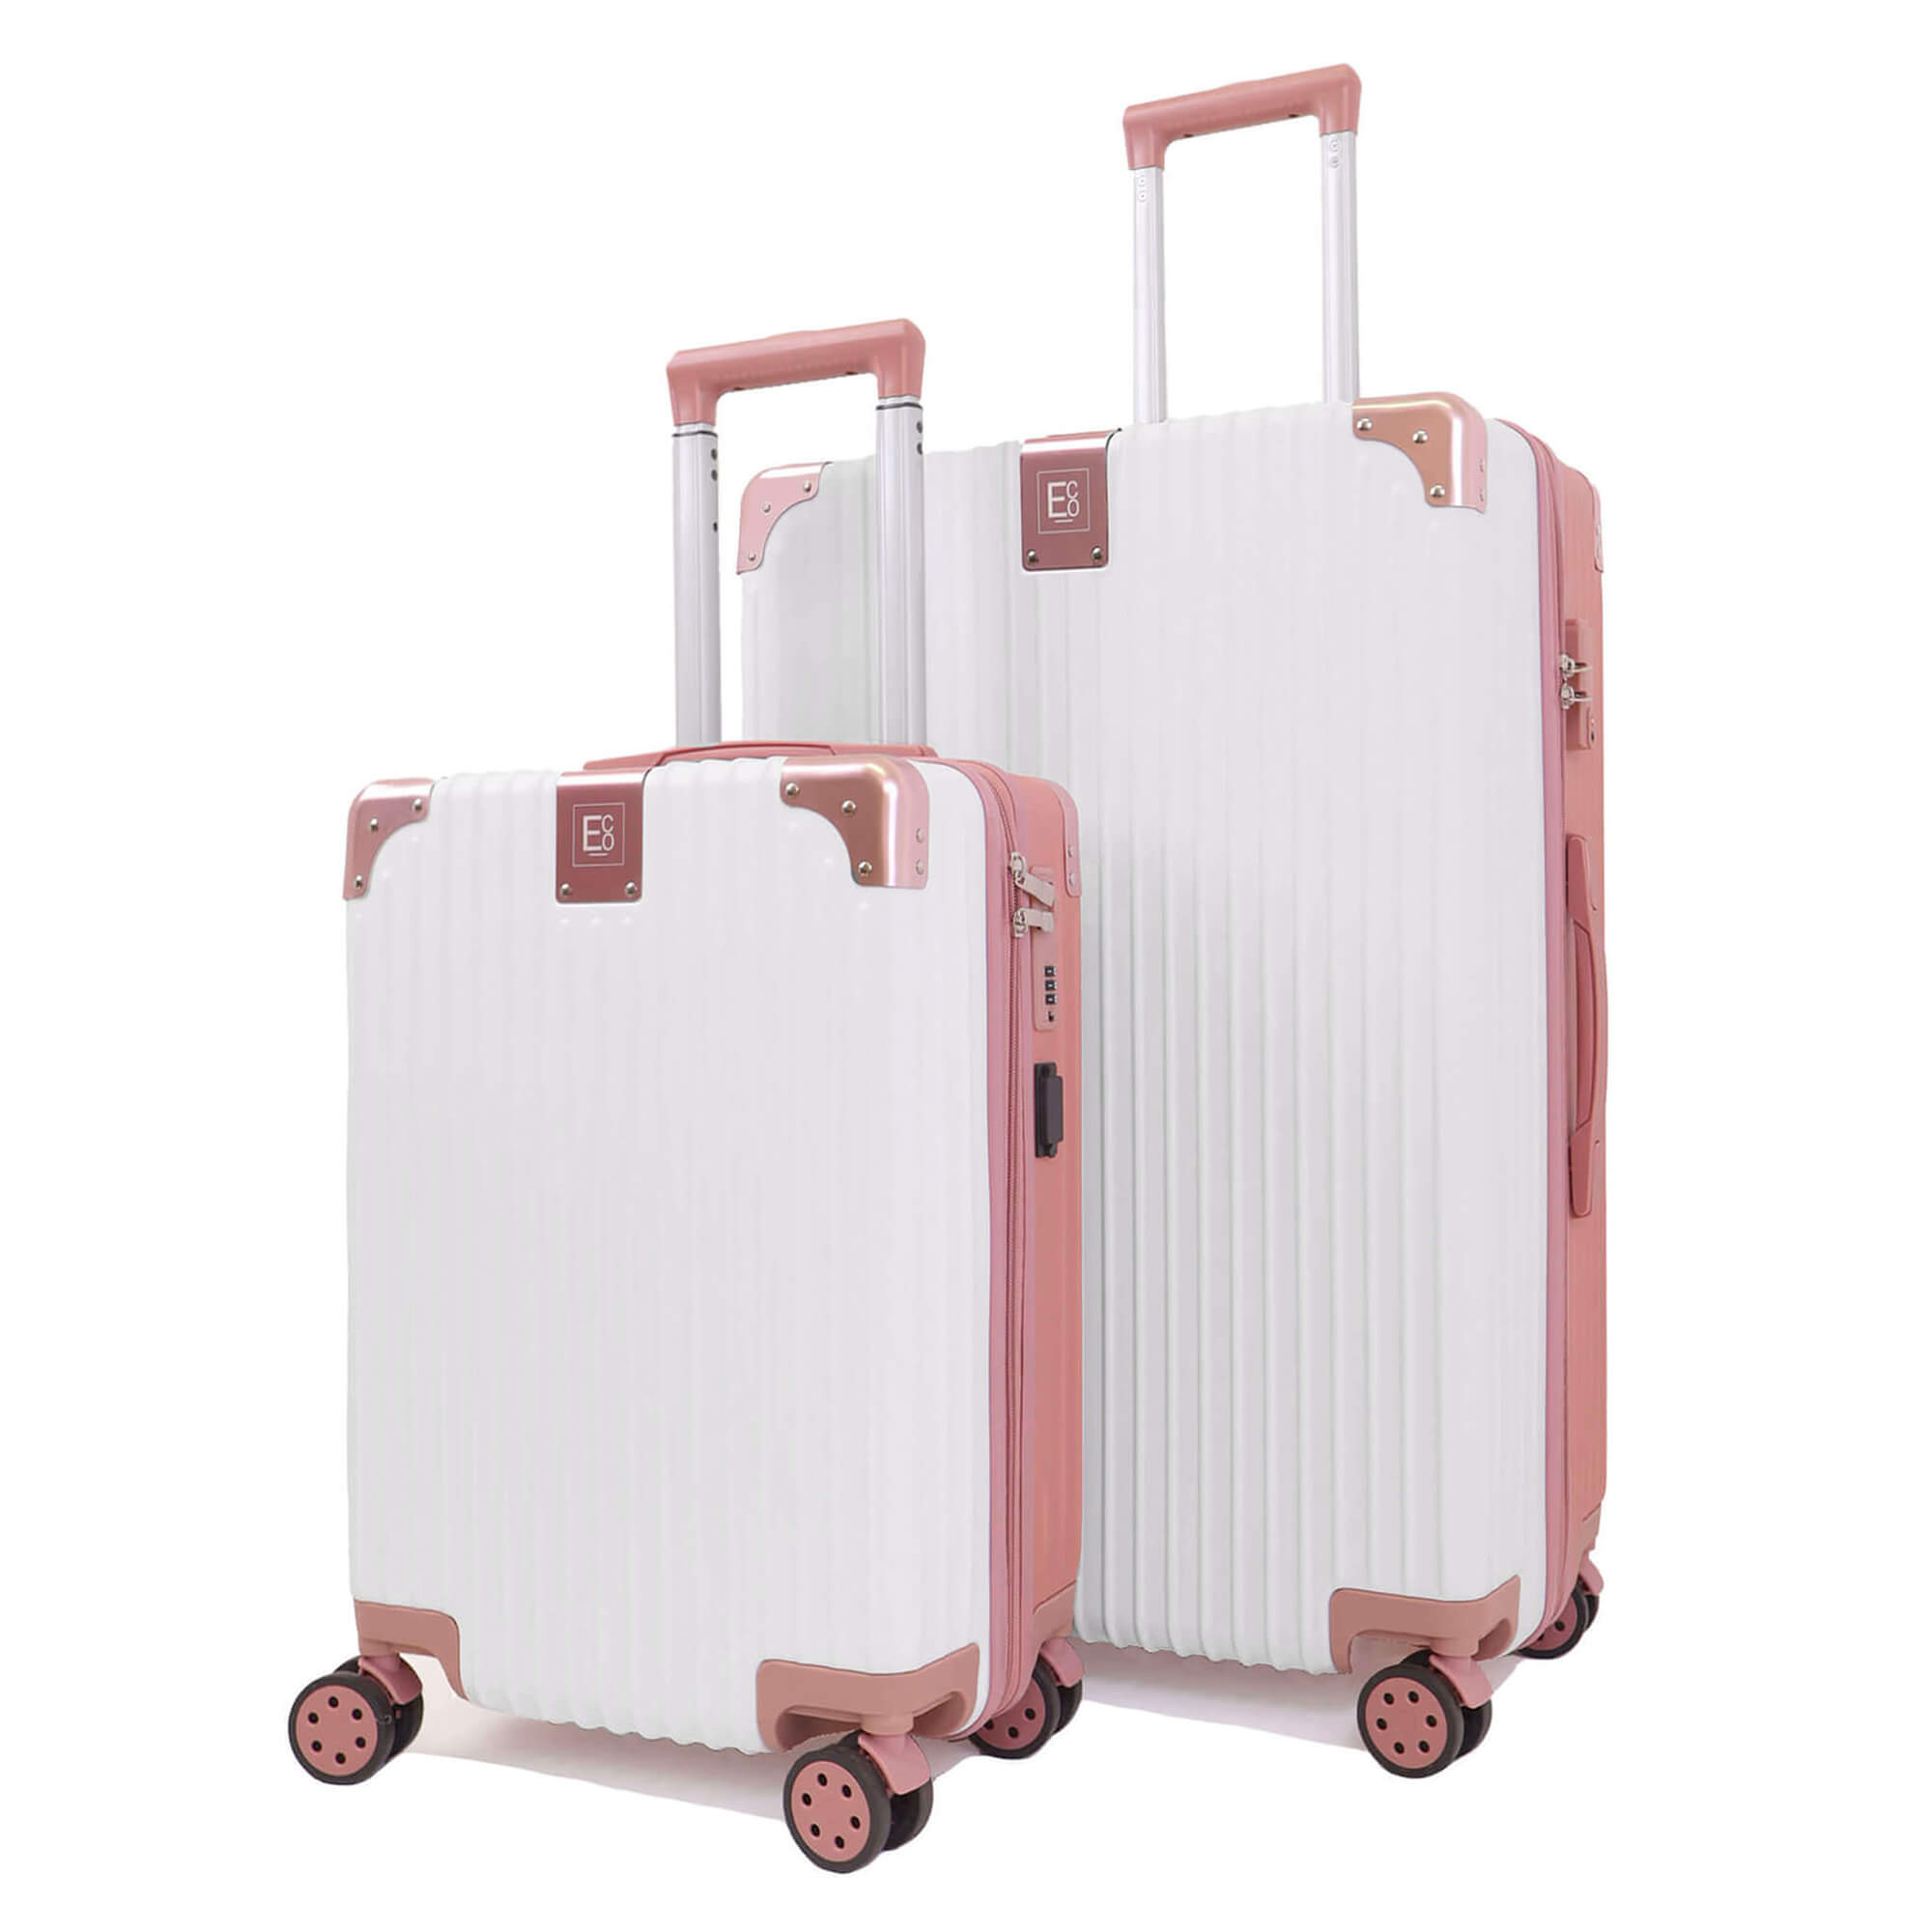 Berlin Hardshell Luggage Suitcases with Cover - Berlin - 3 Pieces